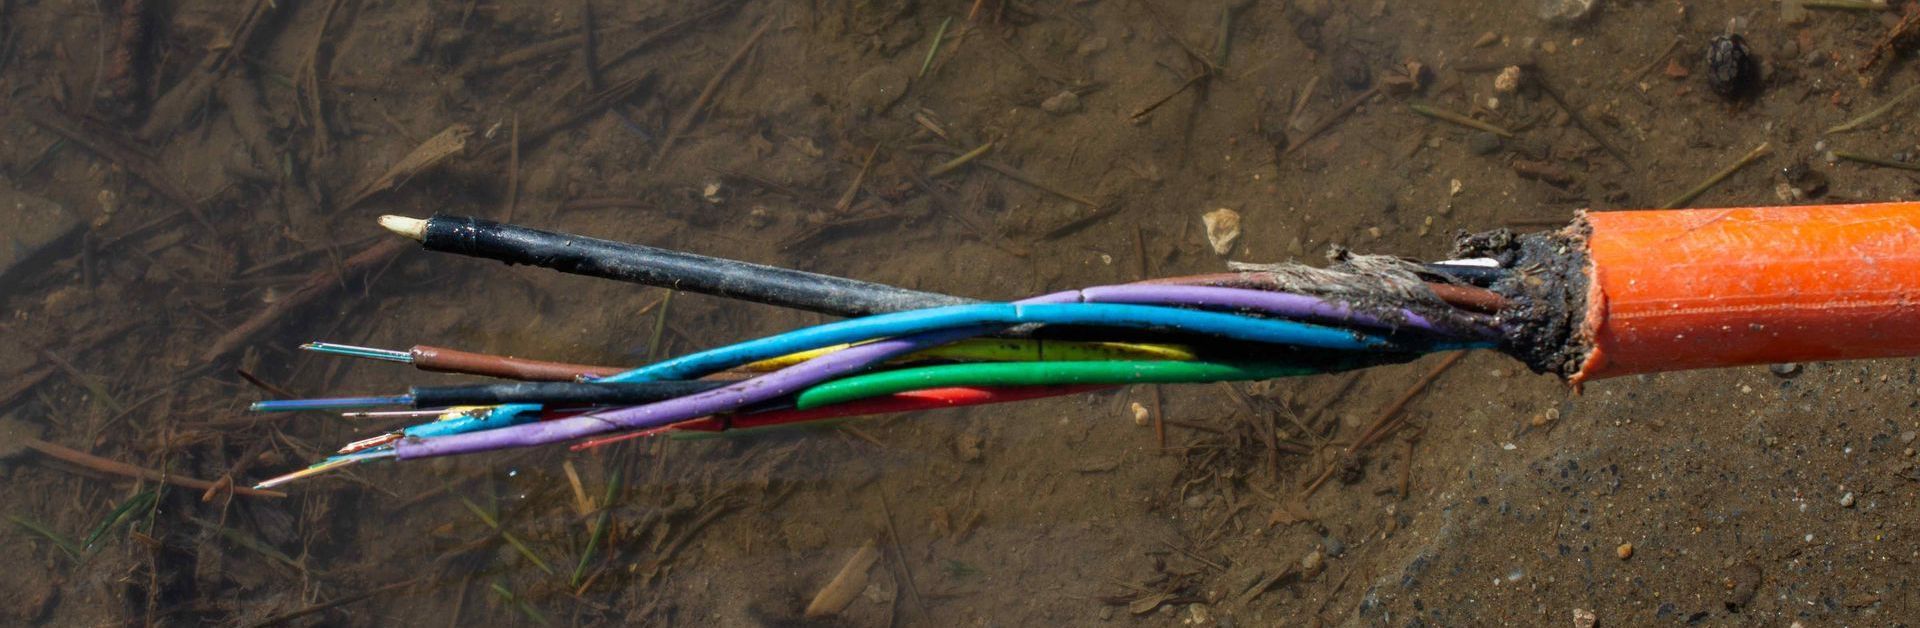 Frayed Electrical Cable Near Water Hazard